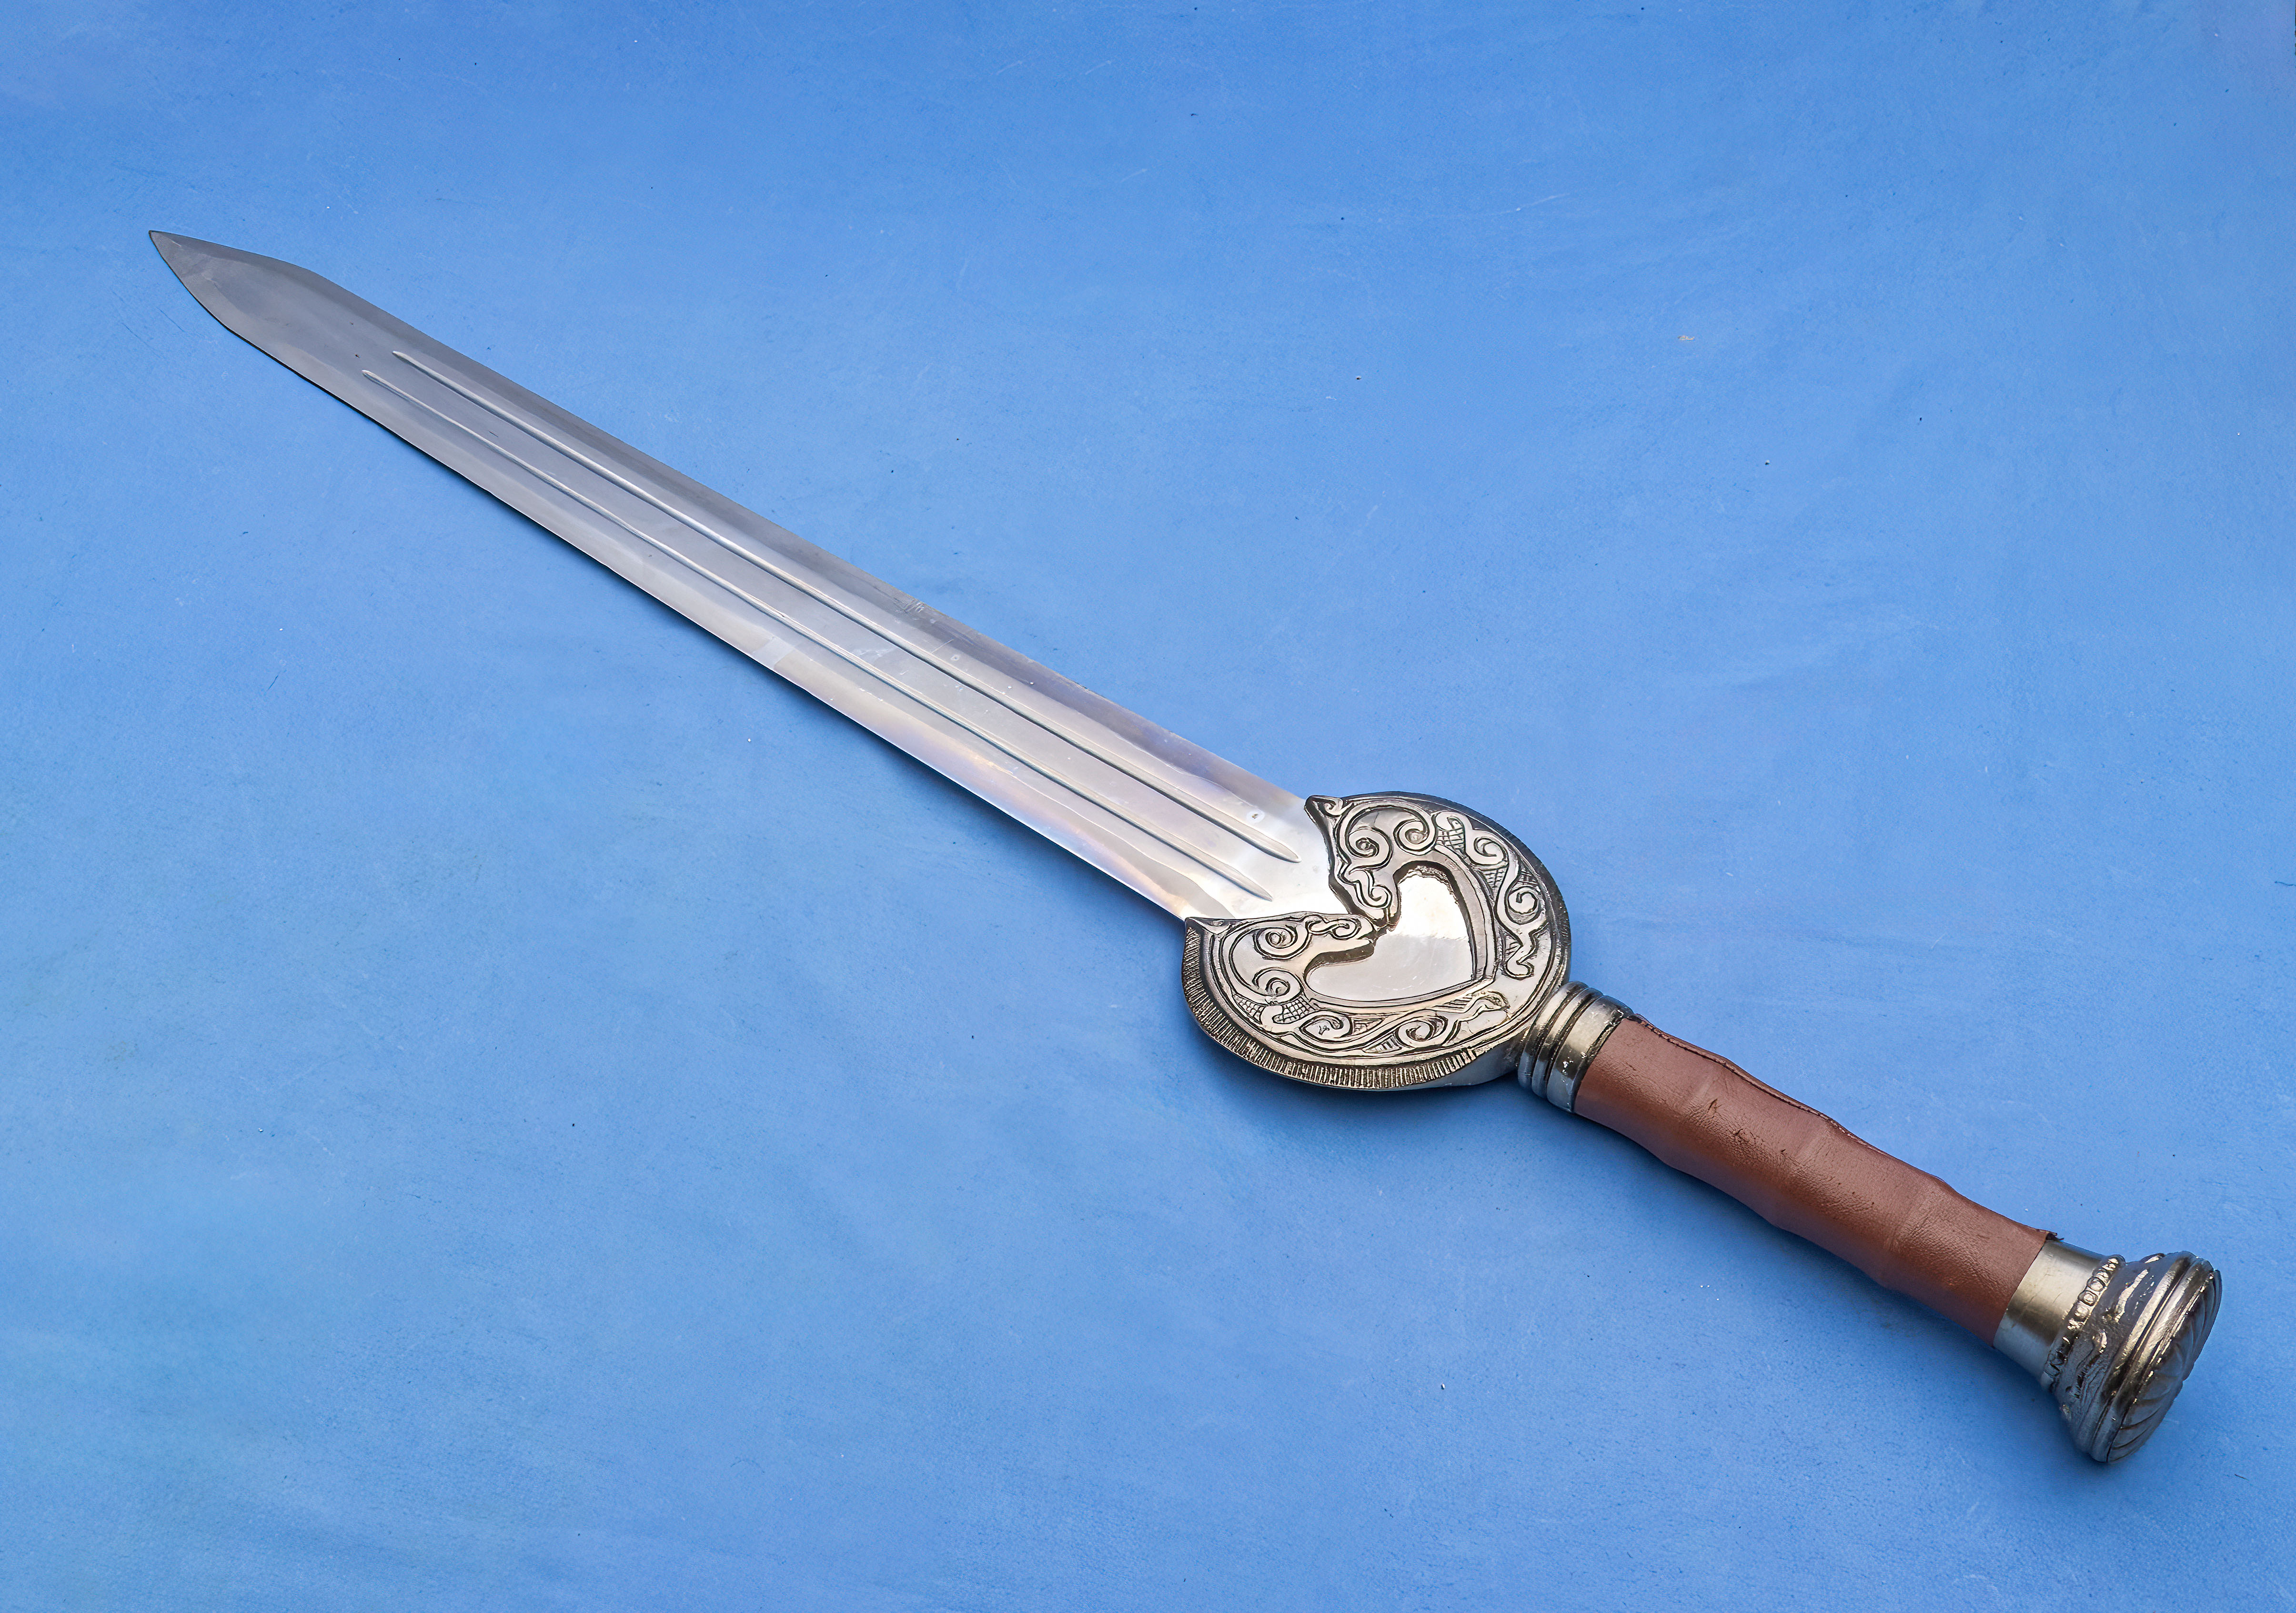 Lord of the Rings Herogrim Theodens replica sword 40.5” - Image 2 of 4